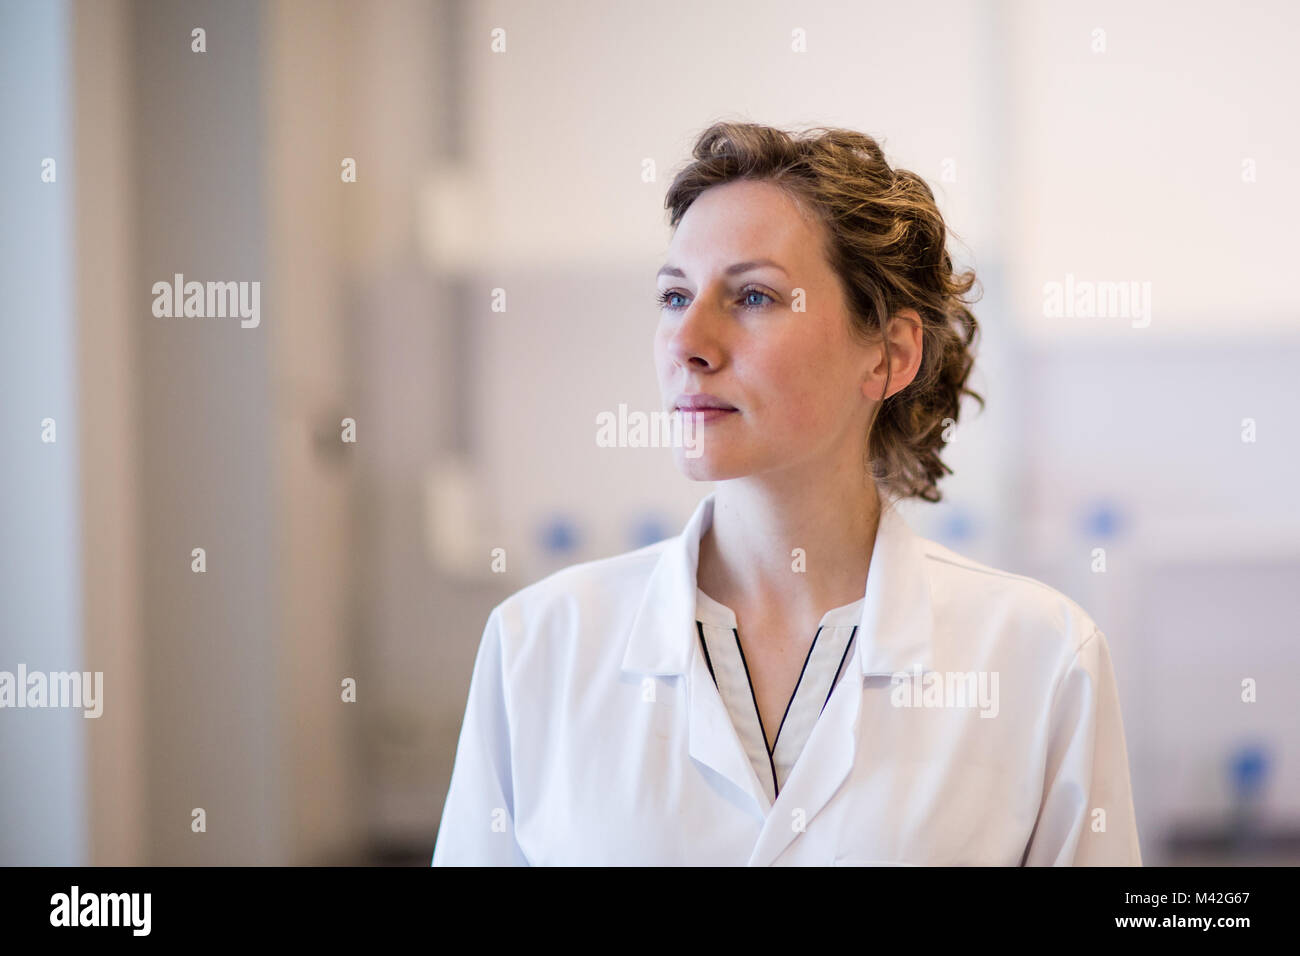 Female medical professional looking thoughtful Stock Photo